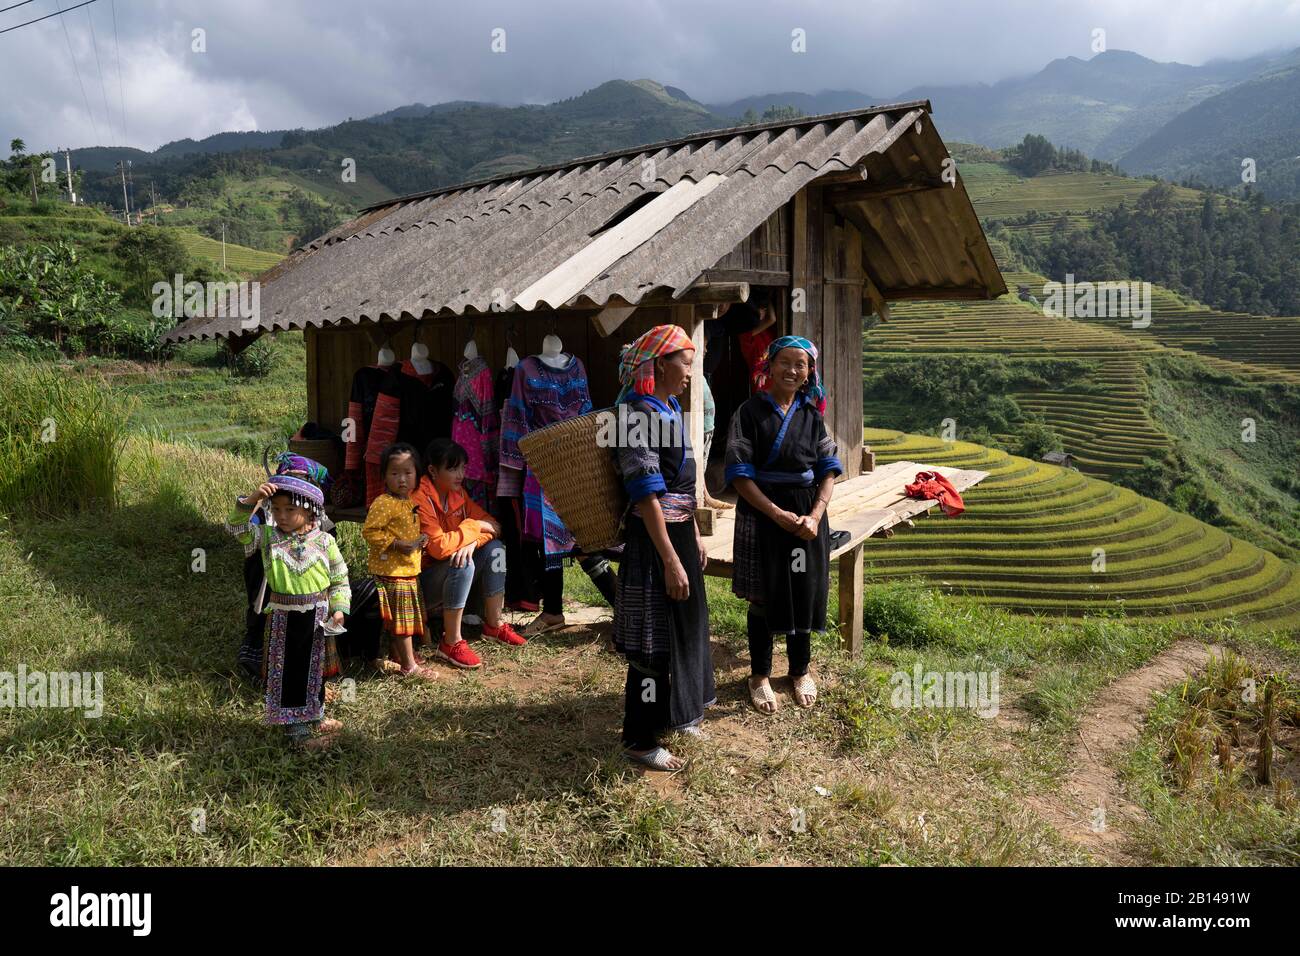 Rice harvest in Vietnam, various people in traditional clothes Stock Photo